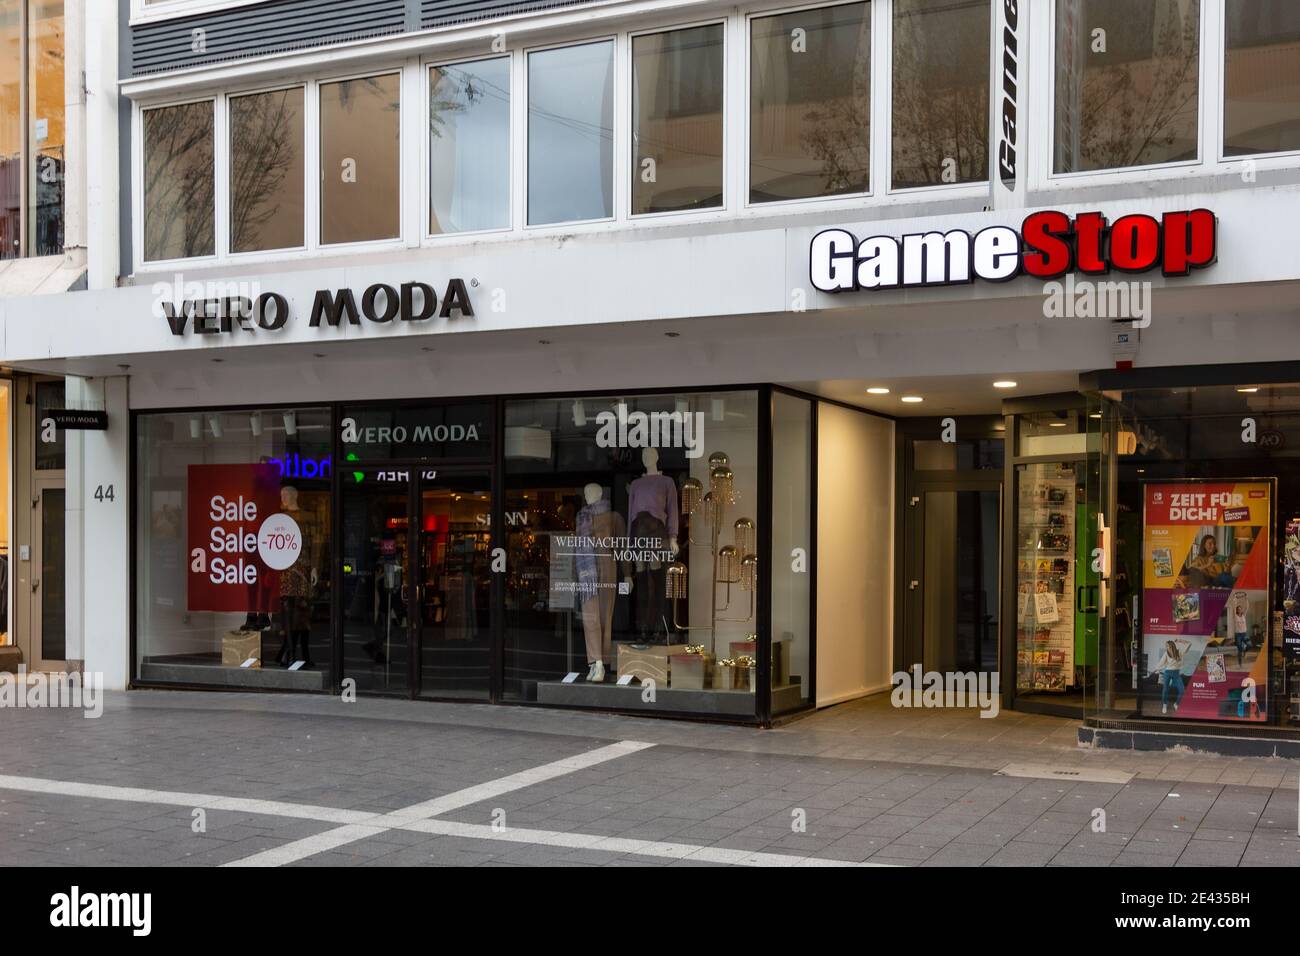 NEUWIED, GERMANY - Dec 29, 2020: Neuwied, Germany - December 29, 2020: facade of the fashion store Vero Moda and a game shop, both closed because of t Stock - Alamy